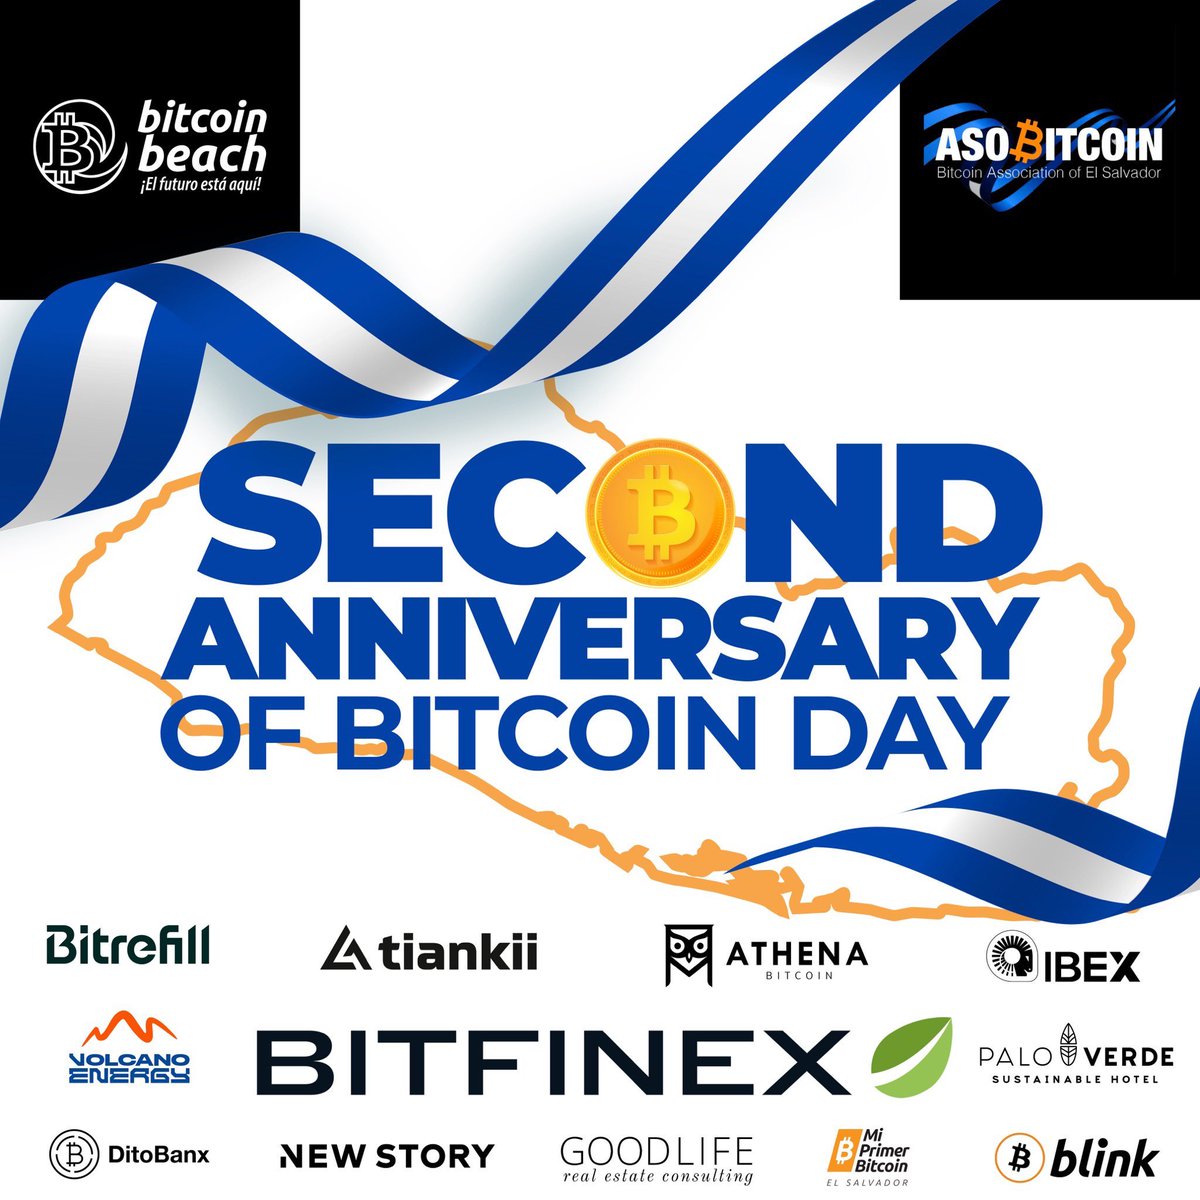 🇸🇻 Happy #BitcoinDay! 🧡

Today we celebrate two years since Bitcoin became legal tender in El Salvador 🤙

Let’s recap some great moments in El Salvador’s Bitcoin history leading up to, and since La Ley Bitcoin went into effect

We’ve posted a few. Add yours to the list!

👇🧵